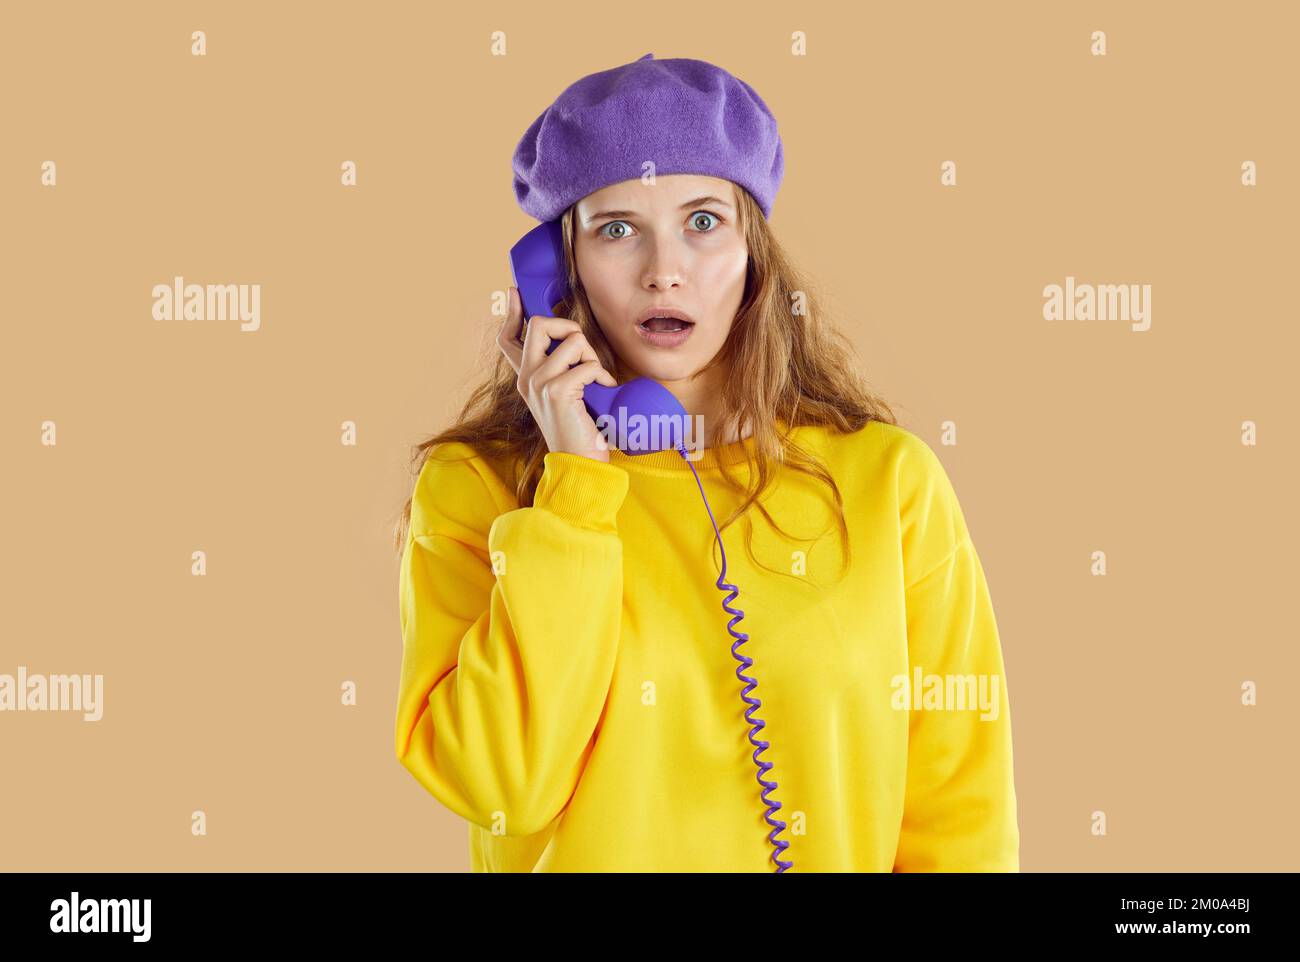 Stunned puzzled woman in purple hat and yellow sweatshirt calling phone on beige background. Stock Photo